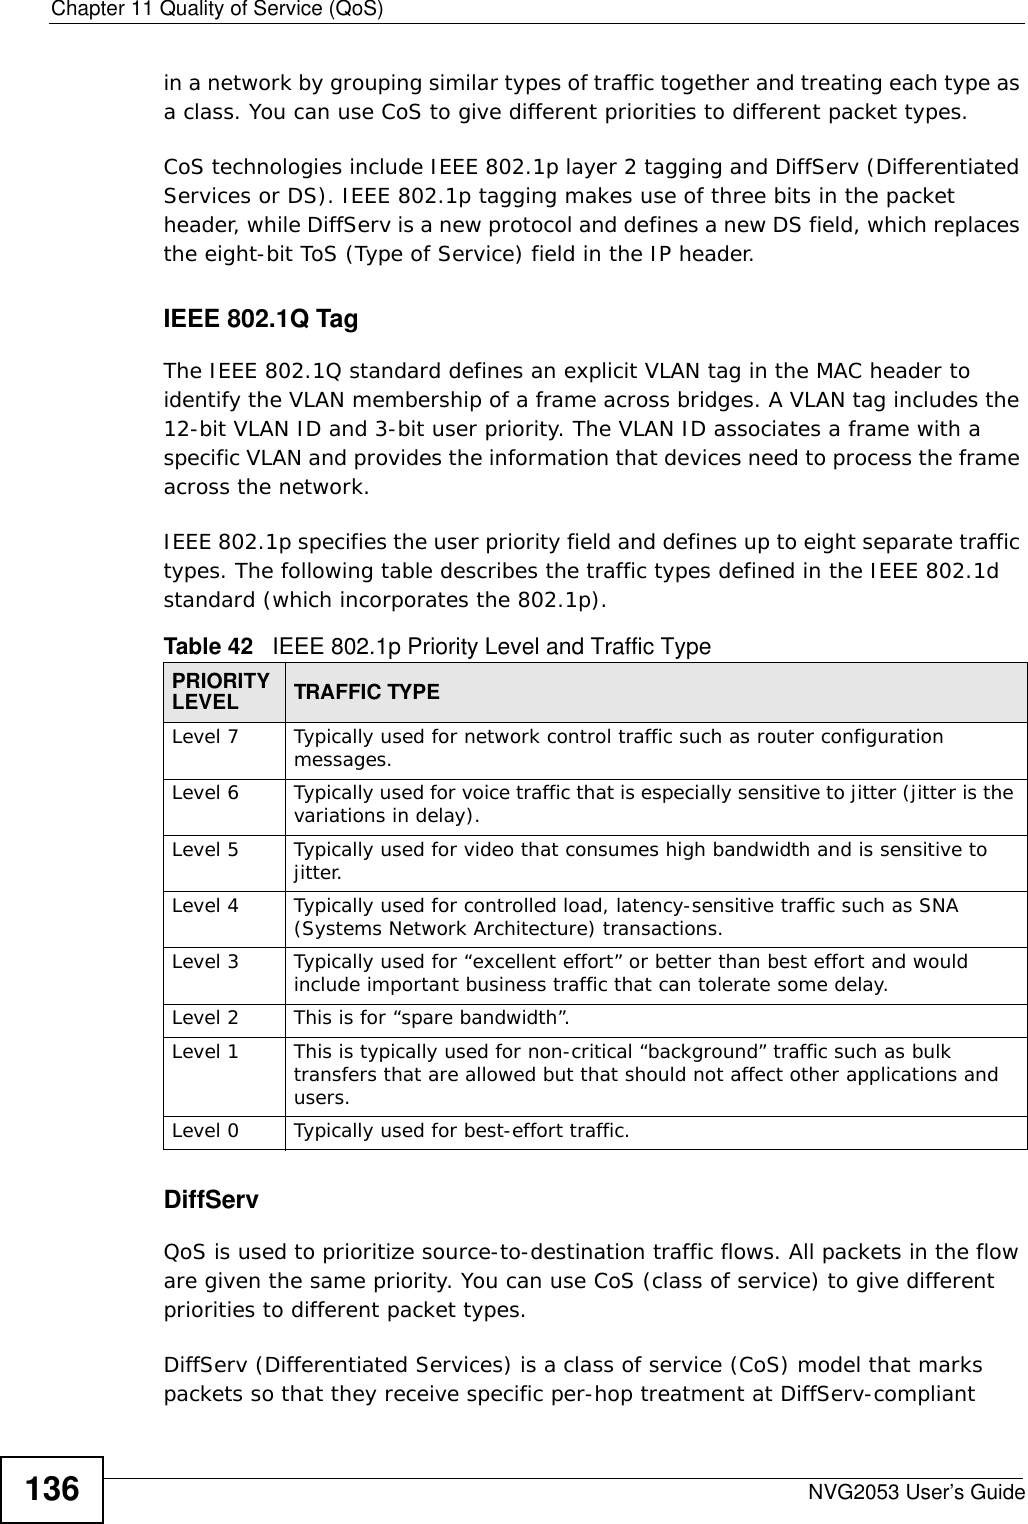 Chapter 11 Quality of Service (QoS)NVG2053 User’s Guide136in a network by grouping similar types of traffic together and treating each type as a class. You can use CoS to give different priorities to different packet types. CoS technologies include IEEE 802.1p layer 2 tagging and DiffServ (Differentiated Services or DS). IEEE 802.1p tagging makes use of three bits in the packet header, while DiffServ is a new protocol and defines a new DS field, which replaces the eight-bit ToS (Type of Service) field in the IP header. IEEE 802.1Q TagThe IEEE 802.1Q standard defines an explicit VLAN tag in the MAC header to identify the VLAN membership of a frame across bridges. A VLAN tag includes the 12-bit VLAN ID and 3-bit user priority. The VLAN ID associates a frame with a specific VLAN and provides the information that devices need to process the frame across the network. IEEE 802.1p specifies the user priority field and defines up to eight separate traffic types. The following table describes the traffic types defined in the IEEE 802.1d standard (which incorporates the 802.1p).  DiffServ QoS is used to prioritize source-to-destination traffic flows. All packets in the flow are given the same priority. You can use CoS (class of service) to give different priorities to different packet types.DiffServ (Differentiated Services) is a class of service (CoS) model that marks packets so that they receive specific per-hop treatment at DiffServ-compliant Table 42   IEEE 802.1p Priority Level and Traffic TypePRIORITY  LEVEL TRAFFIC TYPELevel 7 Typically used for network control traffic such as router configuration messages.Level 6 Typically used for voice traffic that is especially sensitive to jitter (jitter is the variations in delay).Level 5 Typically used for video that consumes high bandwidth and is sensitive to jitter.Level 4 Typically used for controlled load, latency-sensitive traffic such as SNA (Systems Network Architecture) transactions.Level 3 Typically used for “excellent effort” or better than best effort and would include important business traffic that can tolerate some delay.Level 2 This is for “spare bandwidth”. Level 1 This is typically used for non-critical “background” traffic such as bulk transfers that are allowed but that should not affect other applications and users. Level 0 Typically used for best-effort traffic.